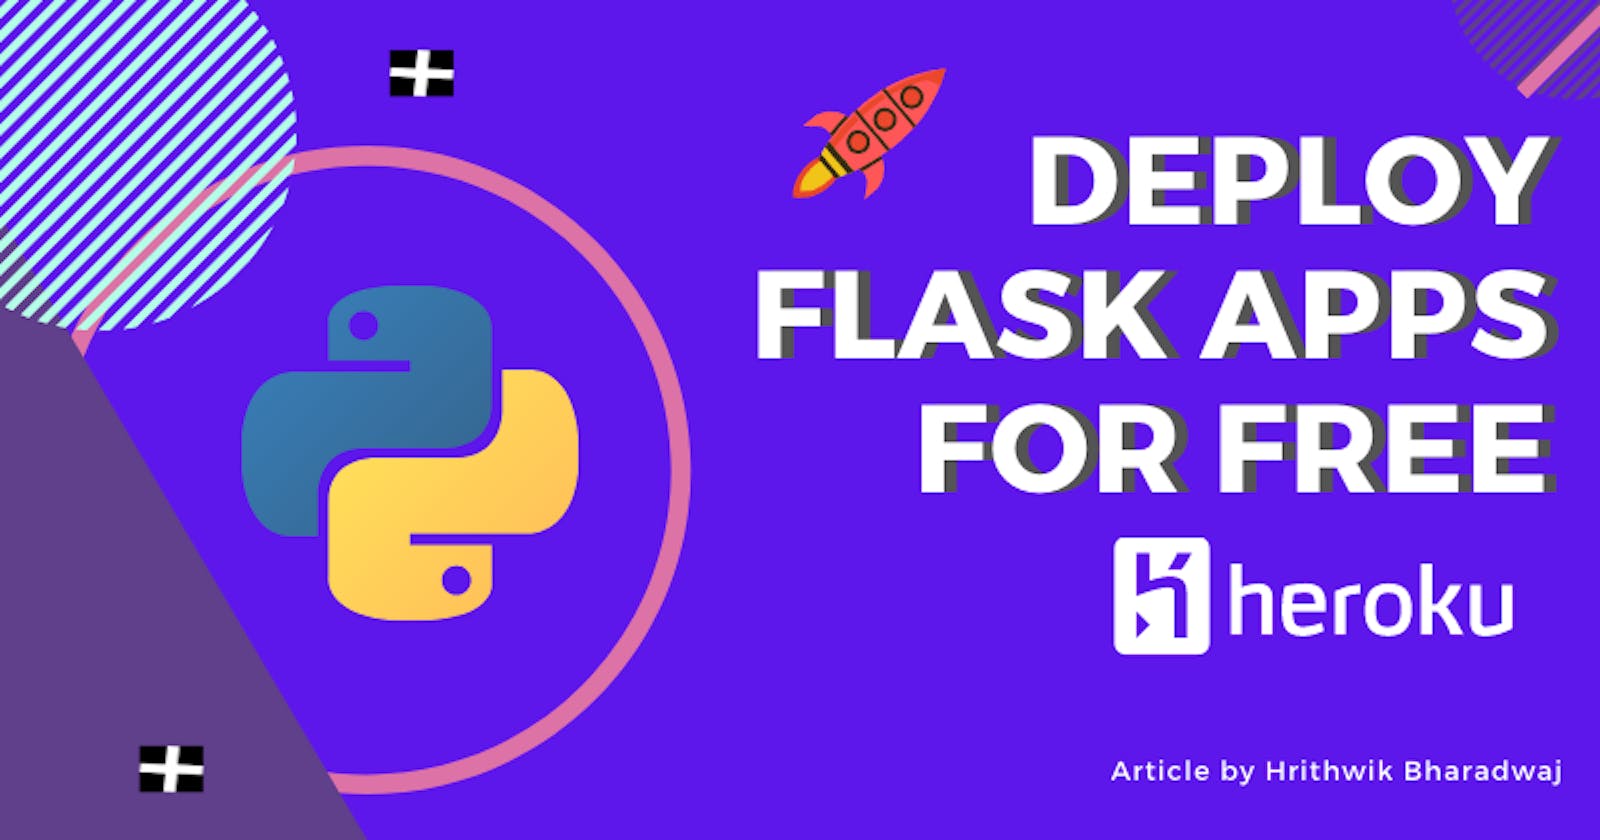 How to Deploy Flask apps for Free with Heroku